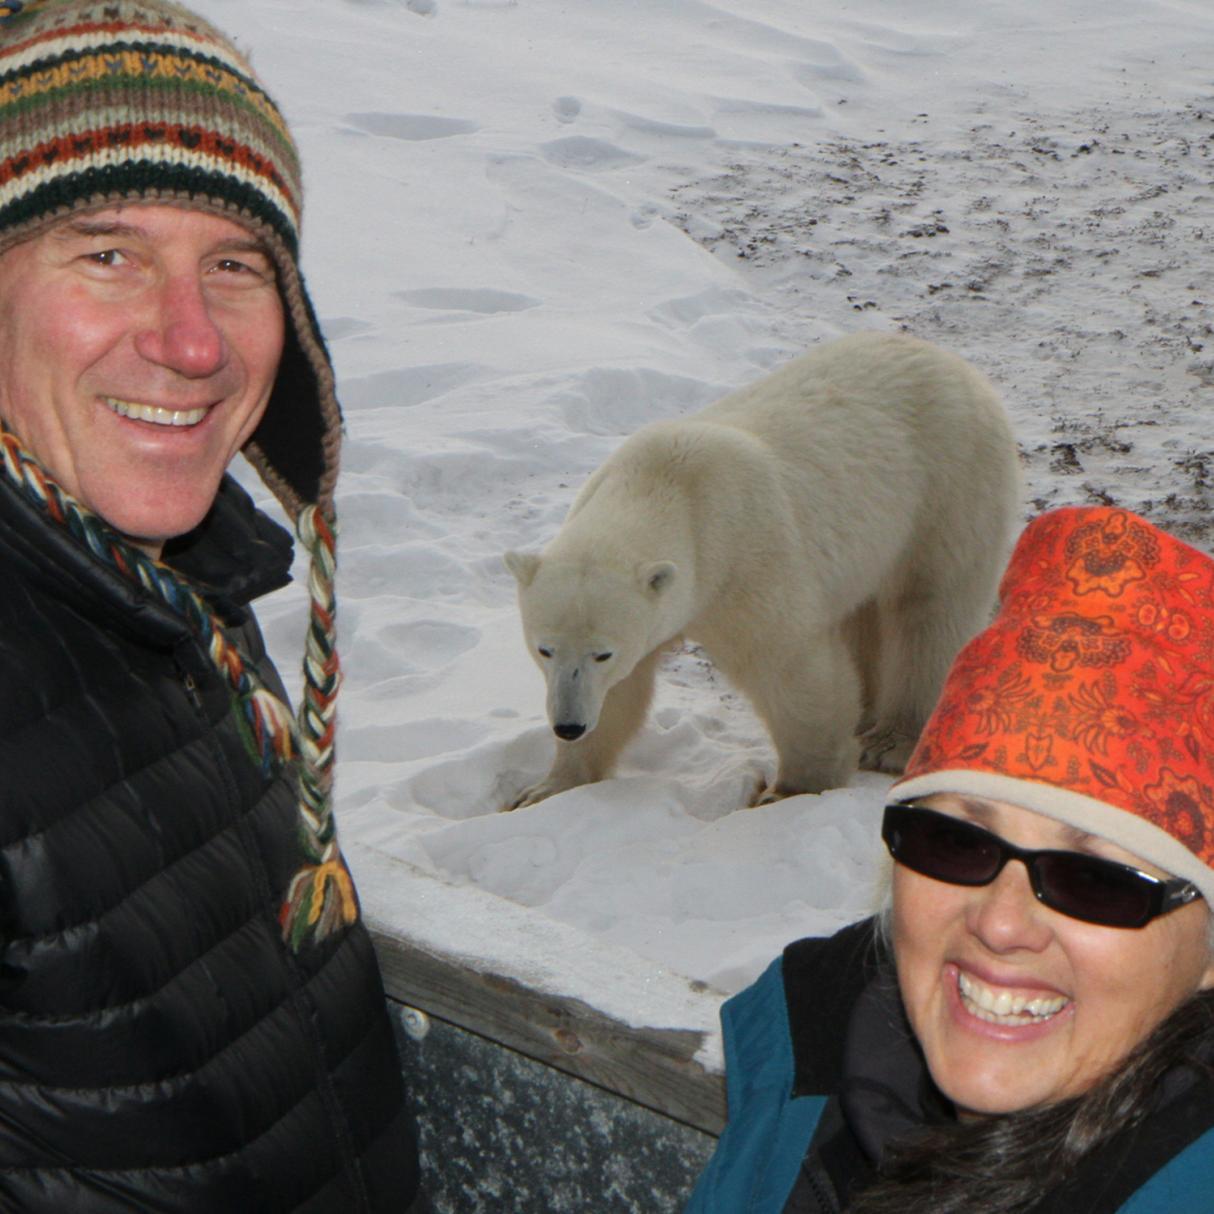 Two people who wear an orange and a striped hat stand smiling in front of a nearby polar bear walking through the snow. 